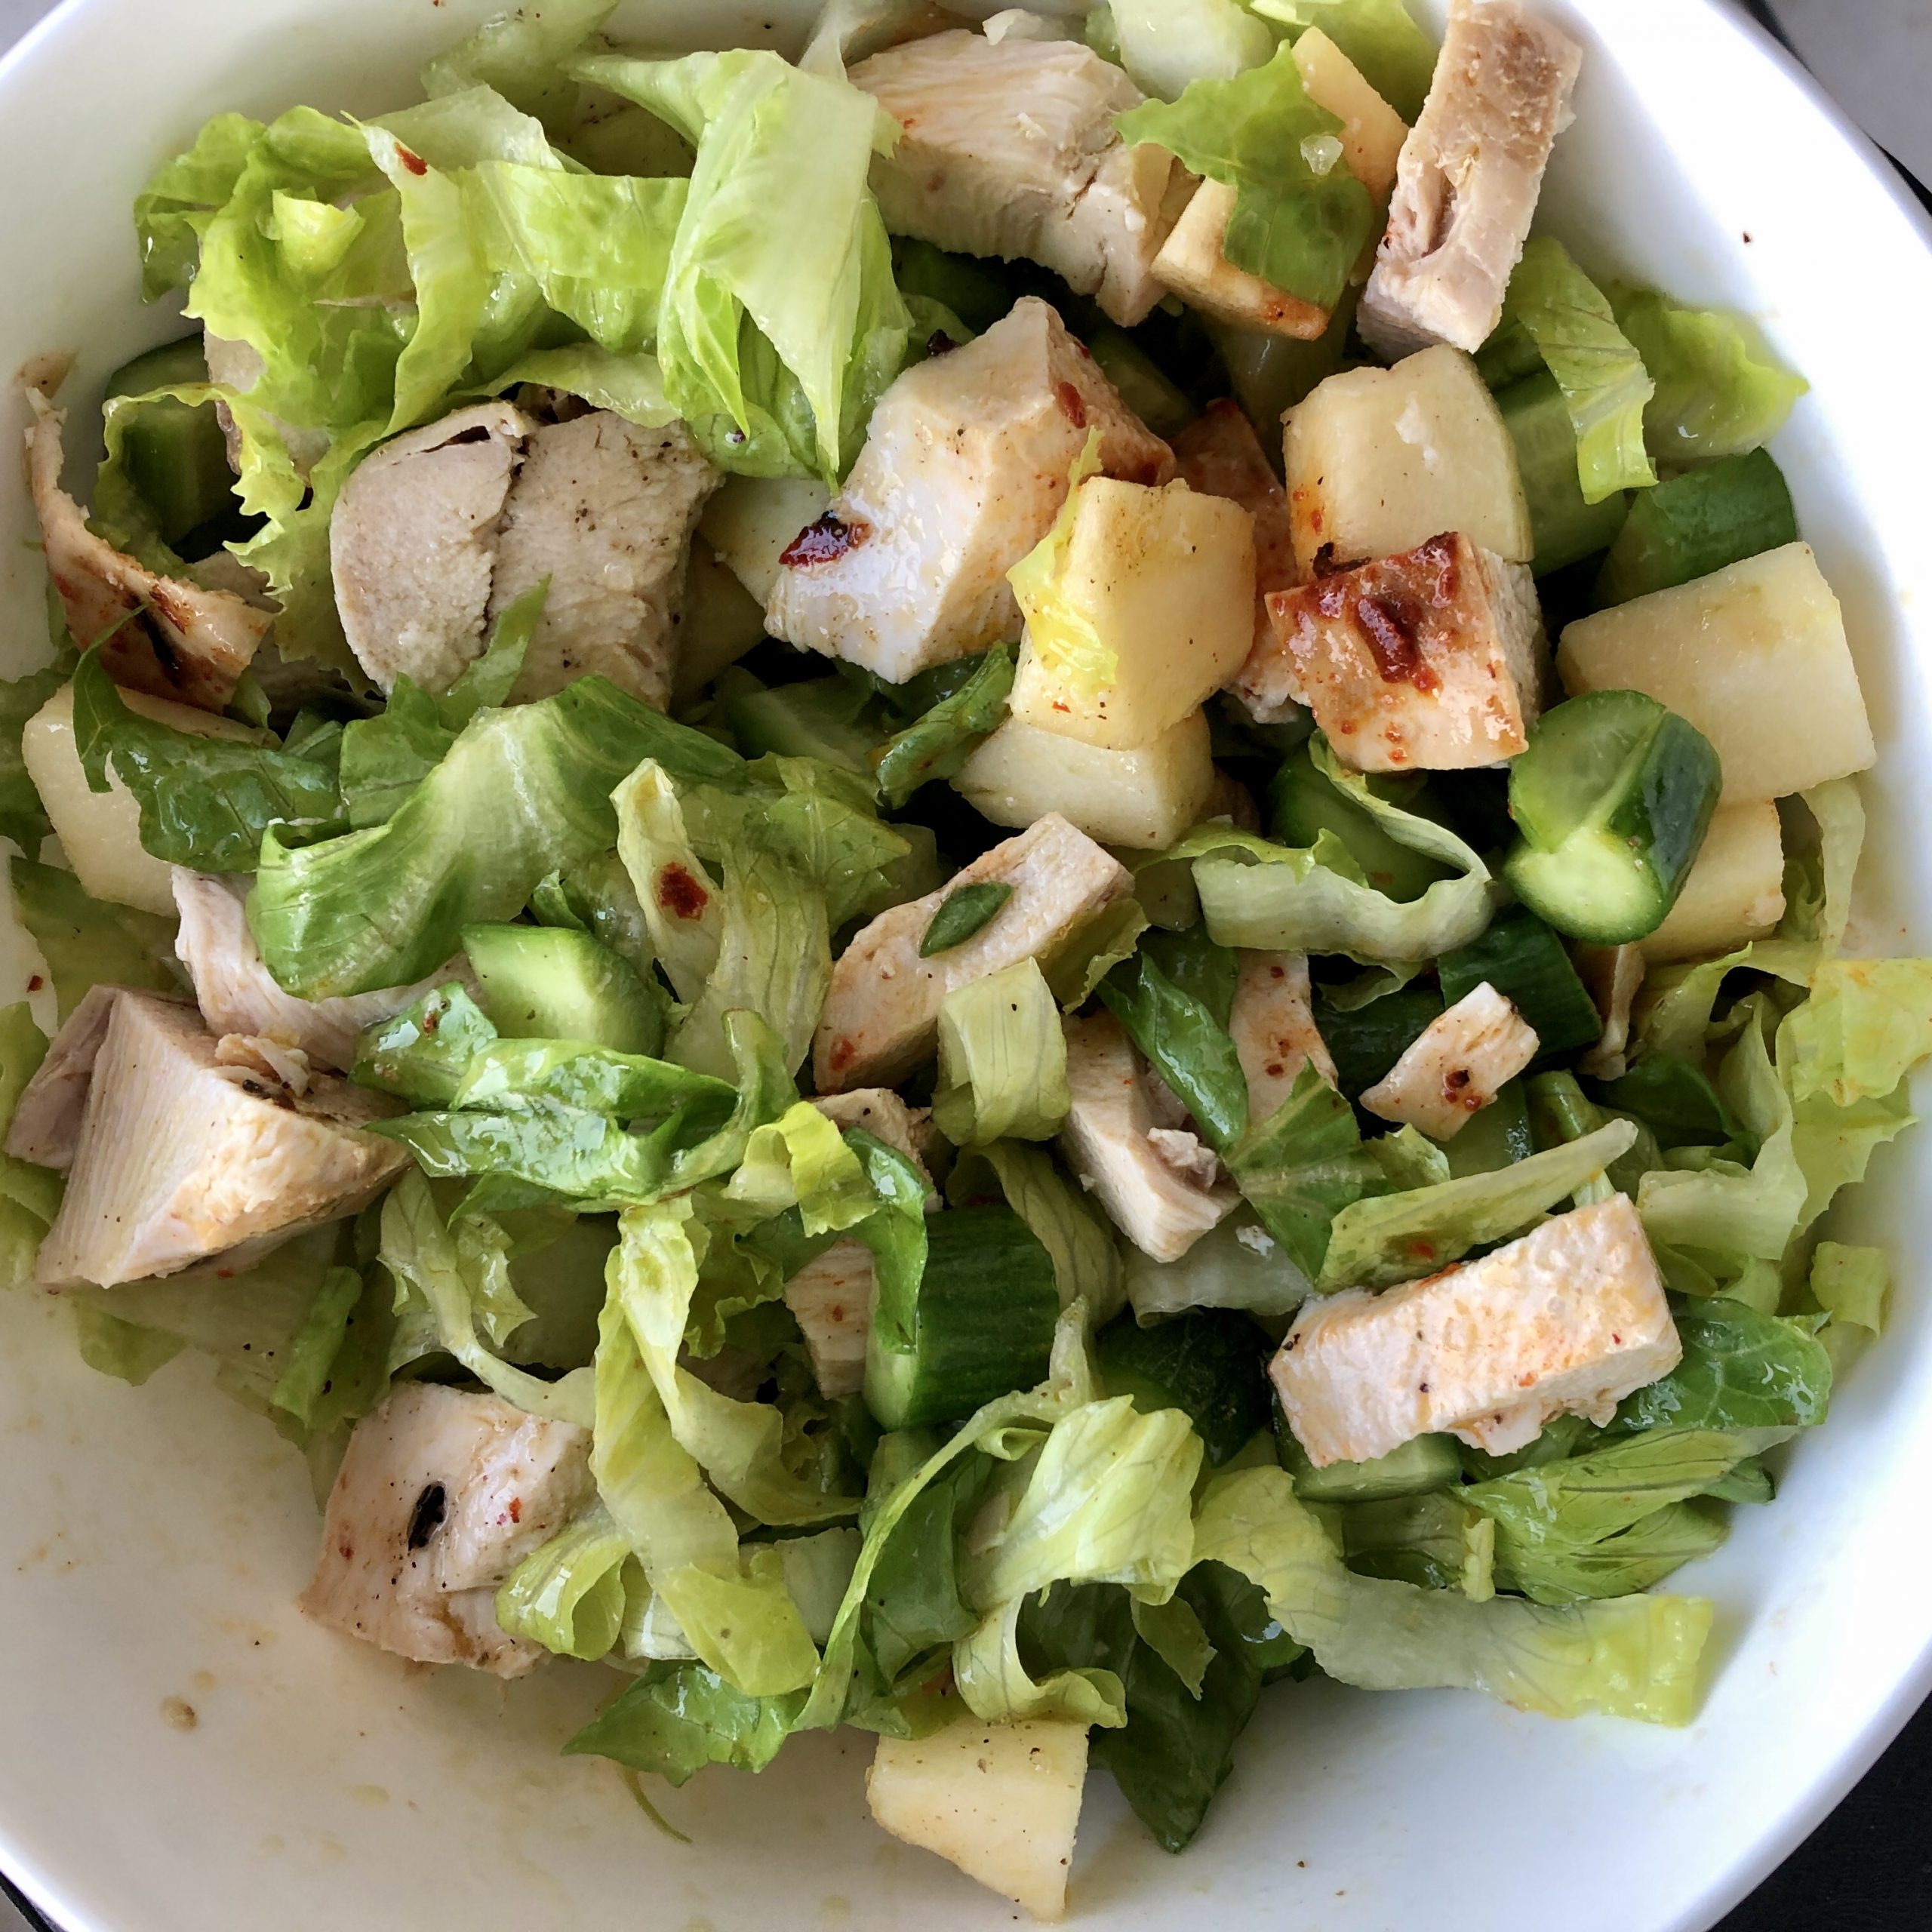 Chicken salad with lettuce, cucumbers and apples